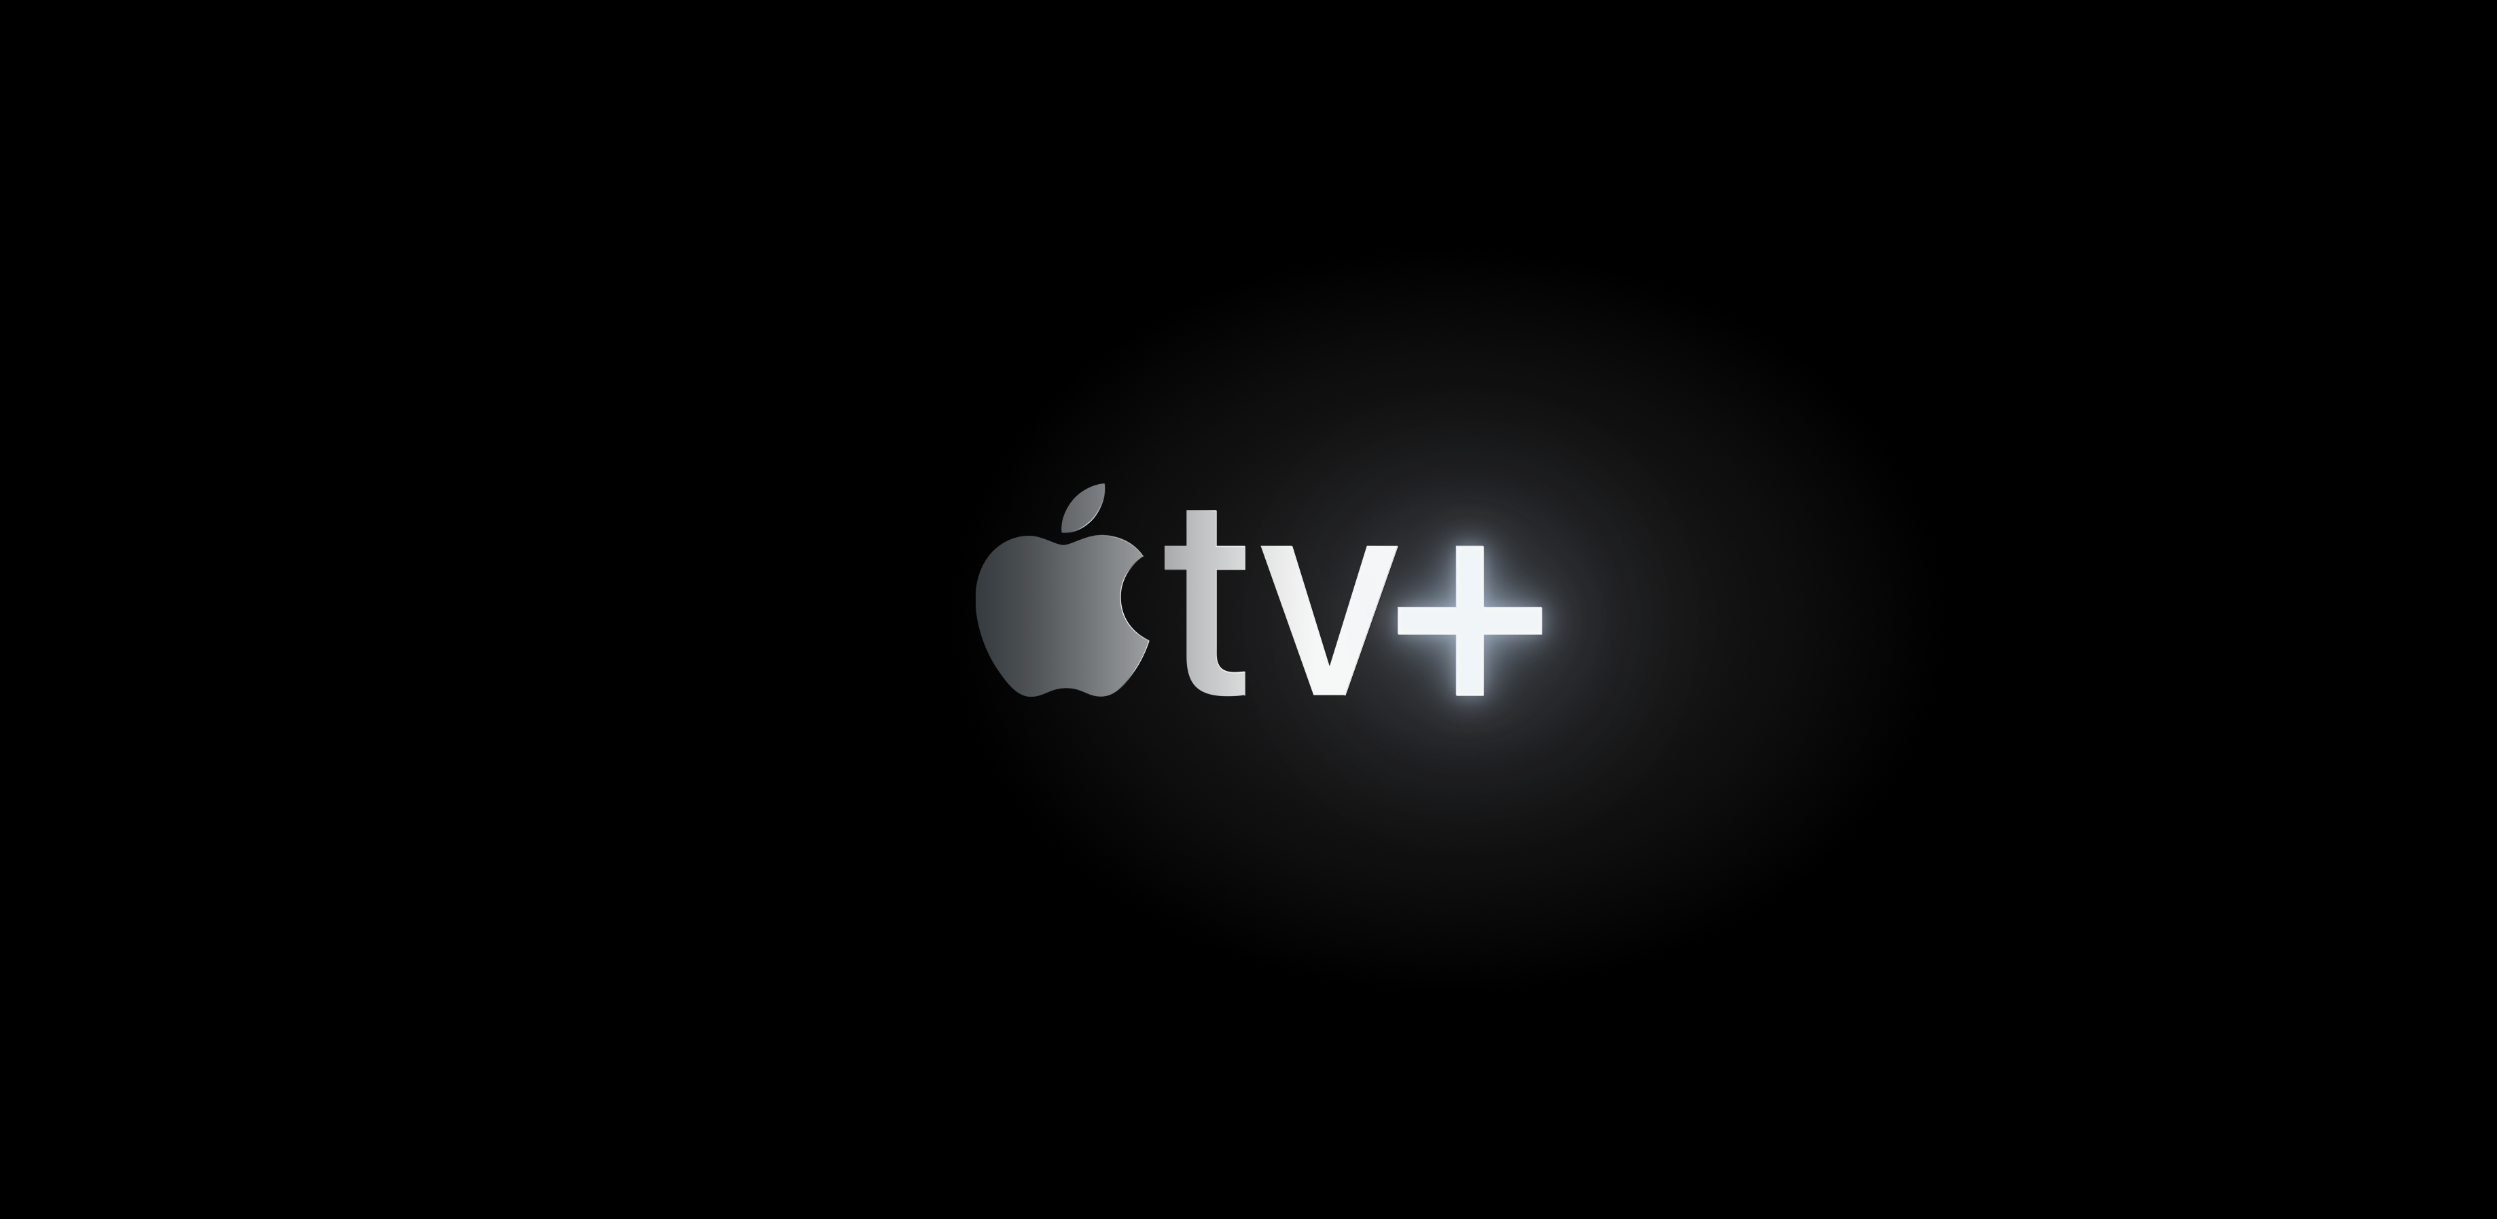 Apple TV + is the only streaming service that takes your privacy seriously